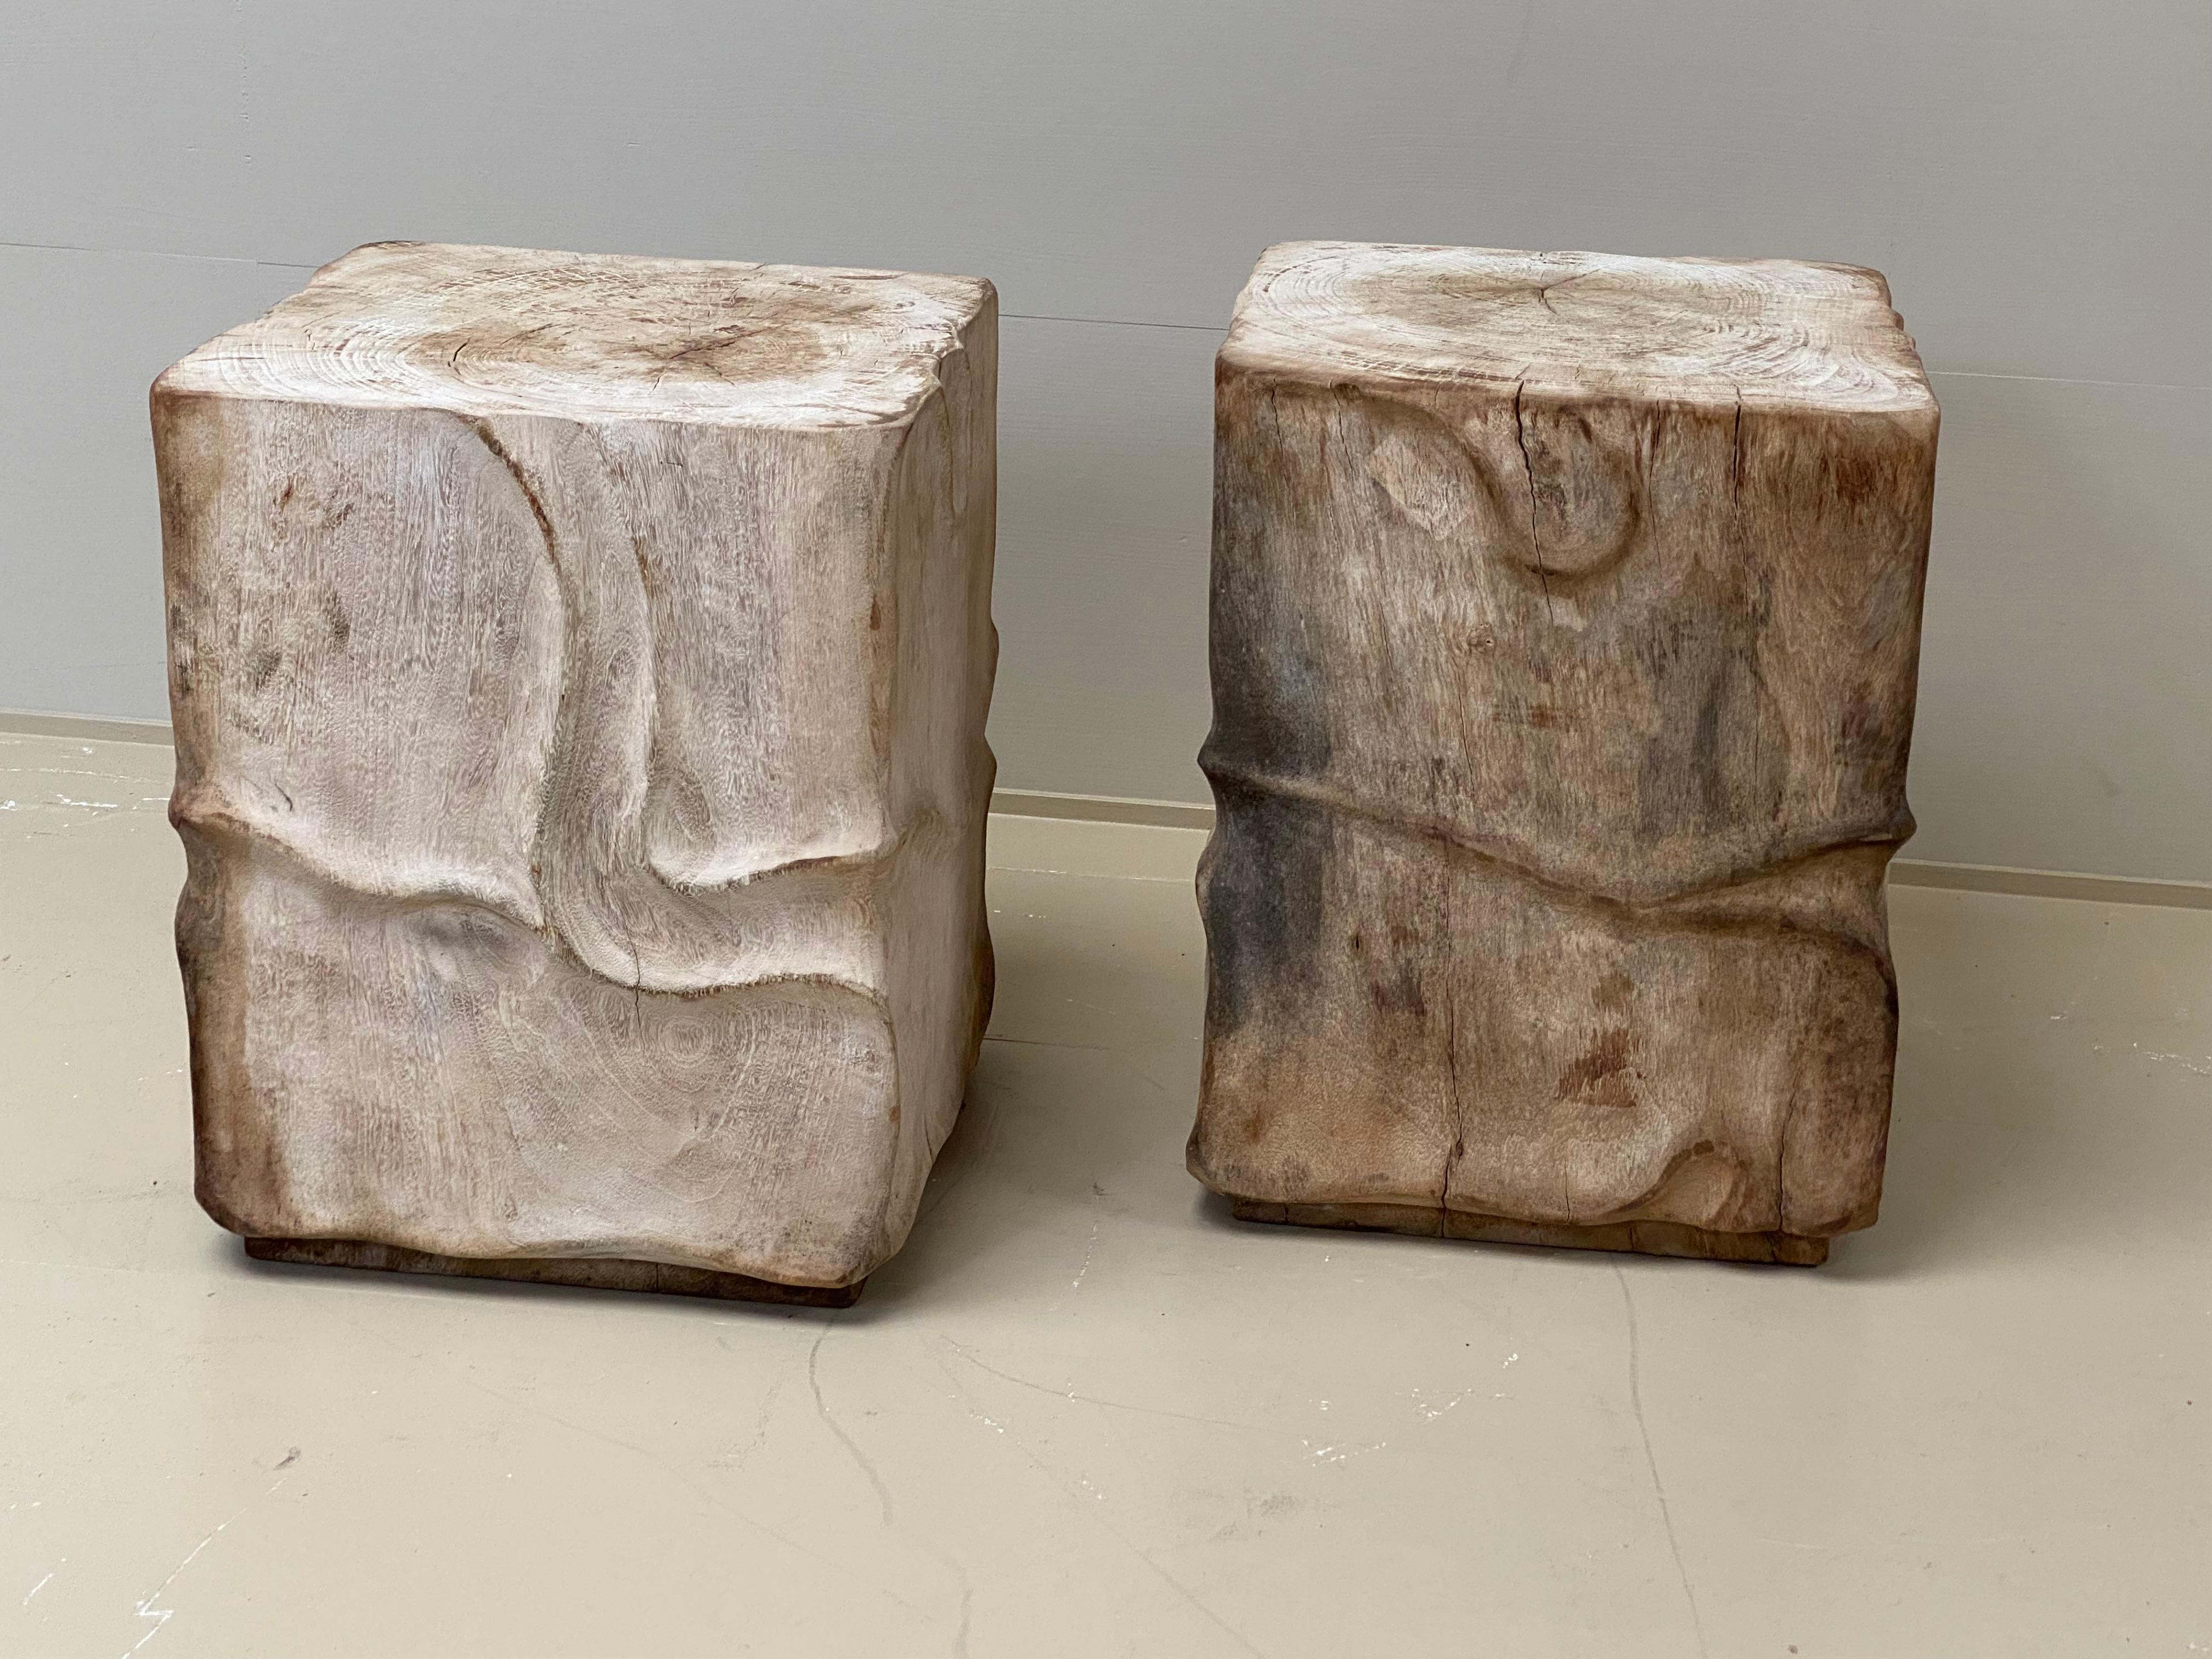 Pair of Wooden, Brutalist Side Side Tables - Rustic Wooden Stools. 2